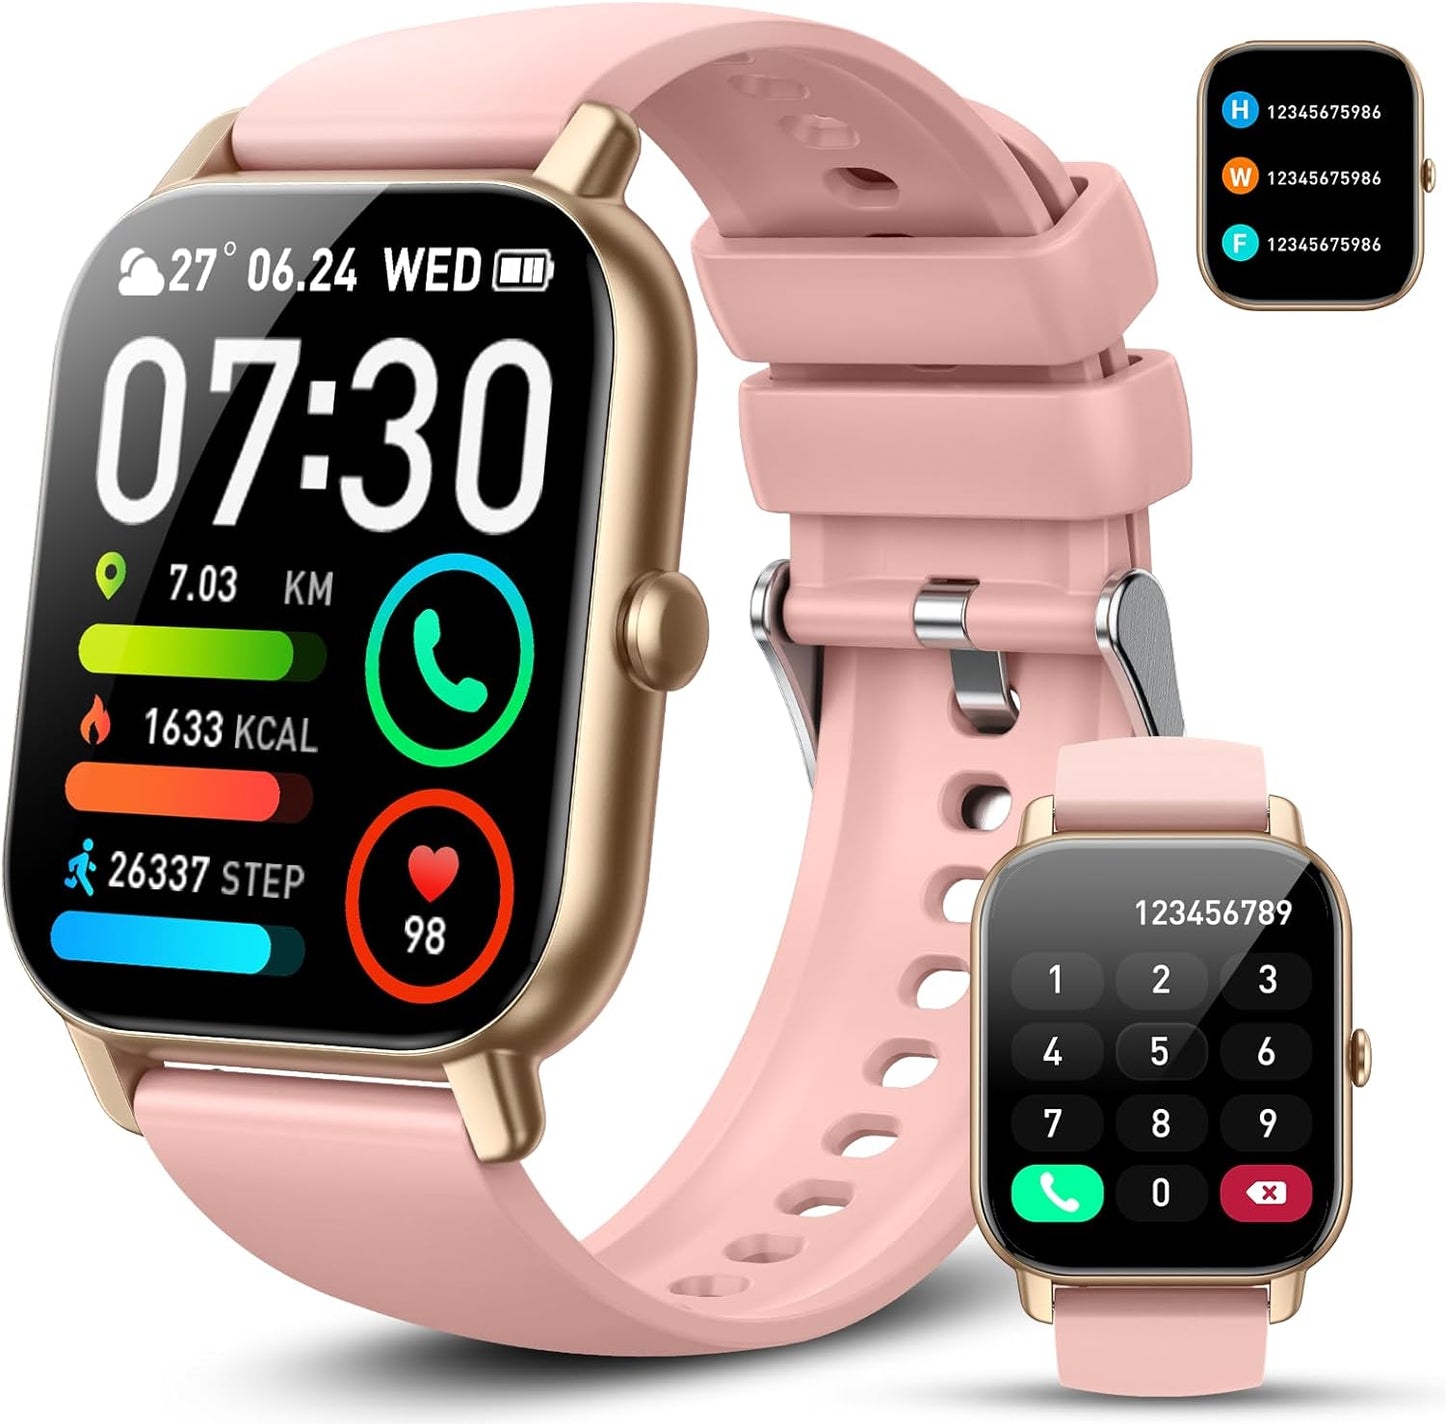 Smartwatch for Android and iOS